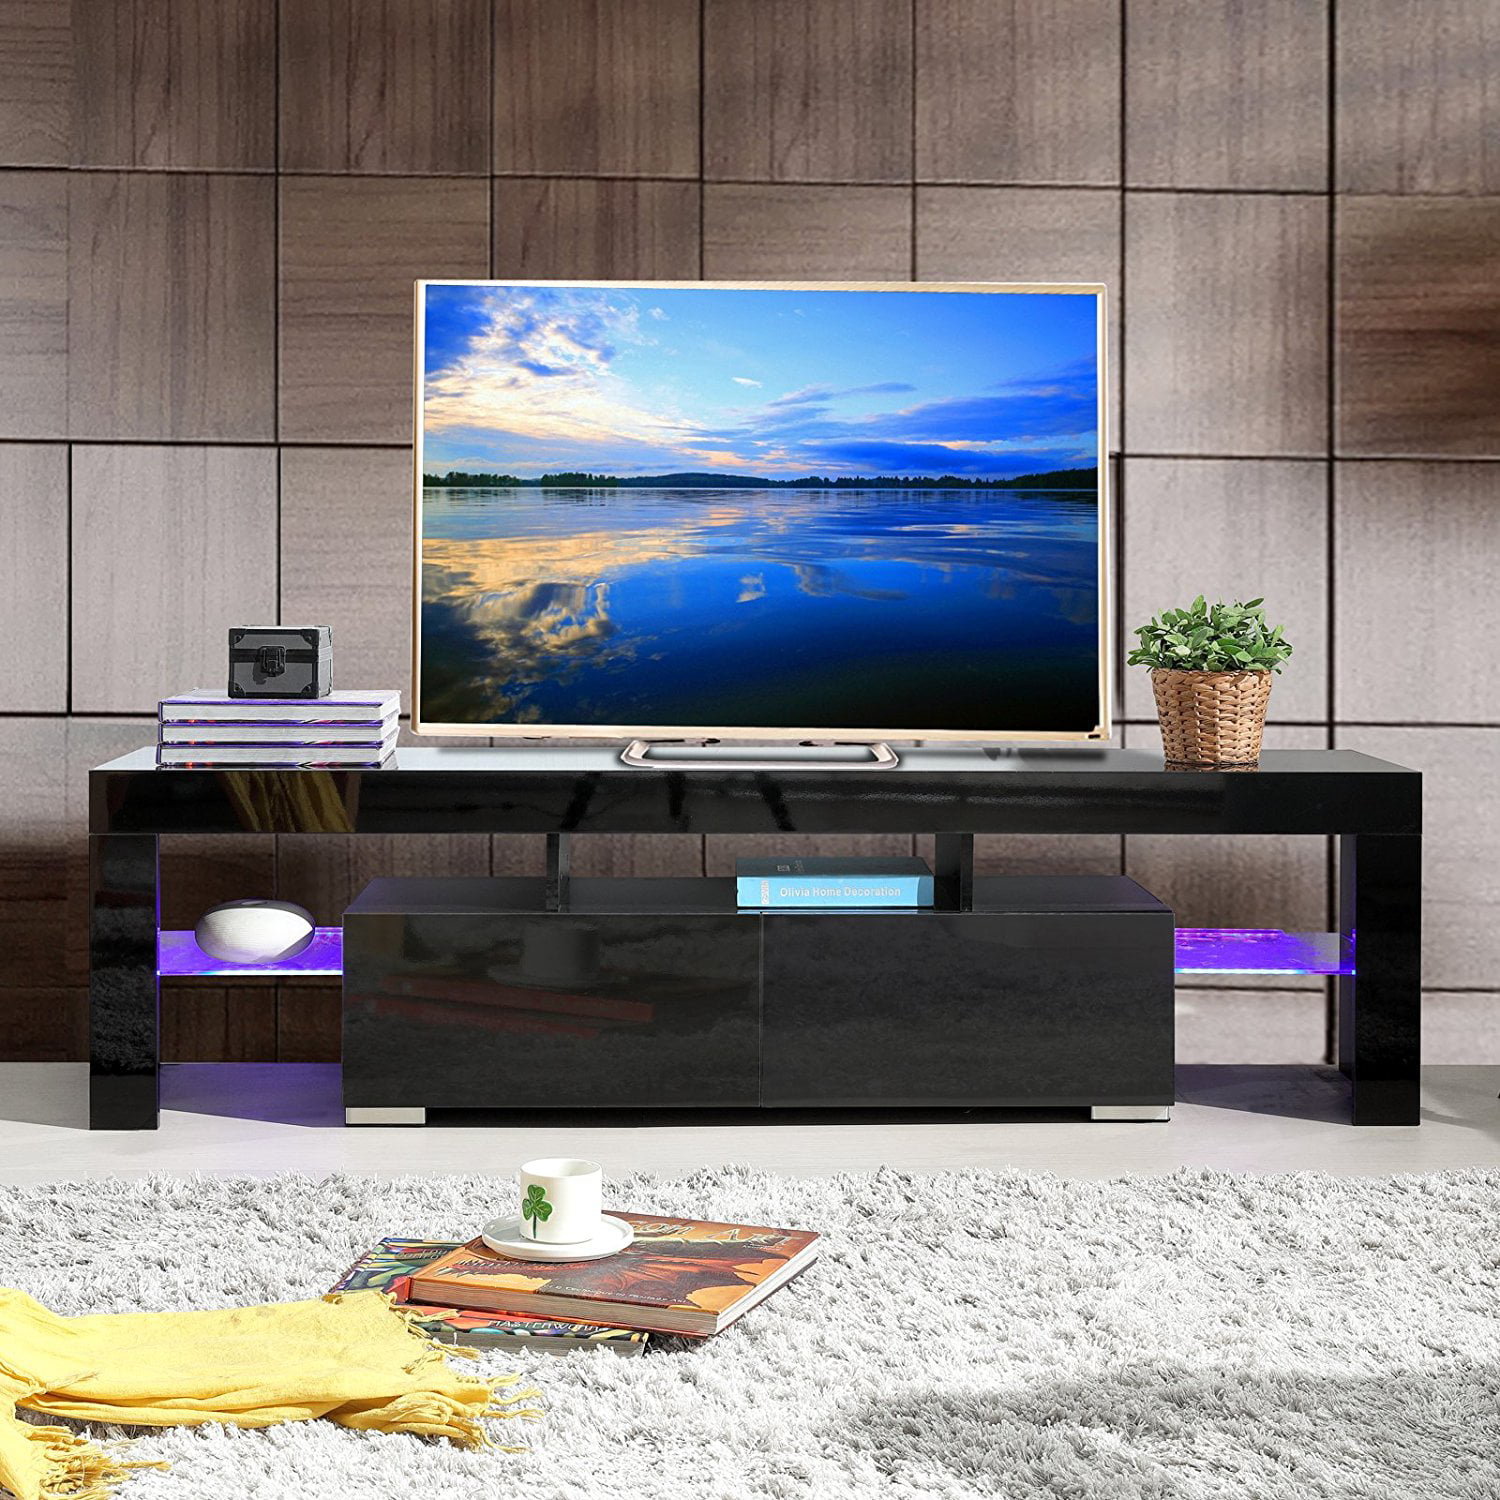 Modern 130cm High Gloss Door and Matt Body TV Unit Stand Cabinet W//LED Lights Flat Screen TV Cabinet Console Table for Livingroom Bedroom with Storage Drawer